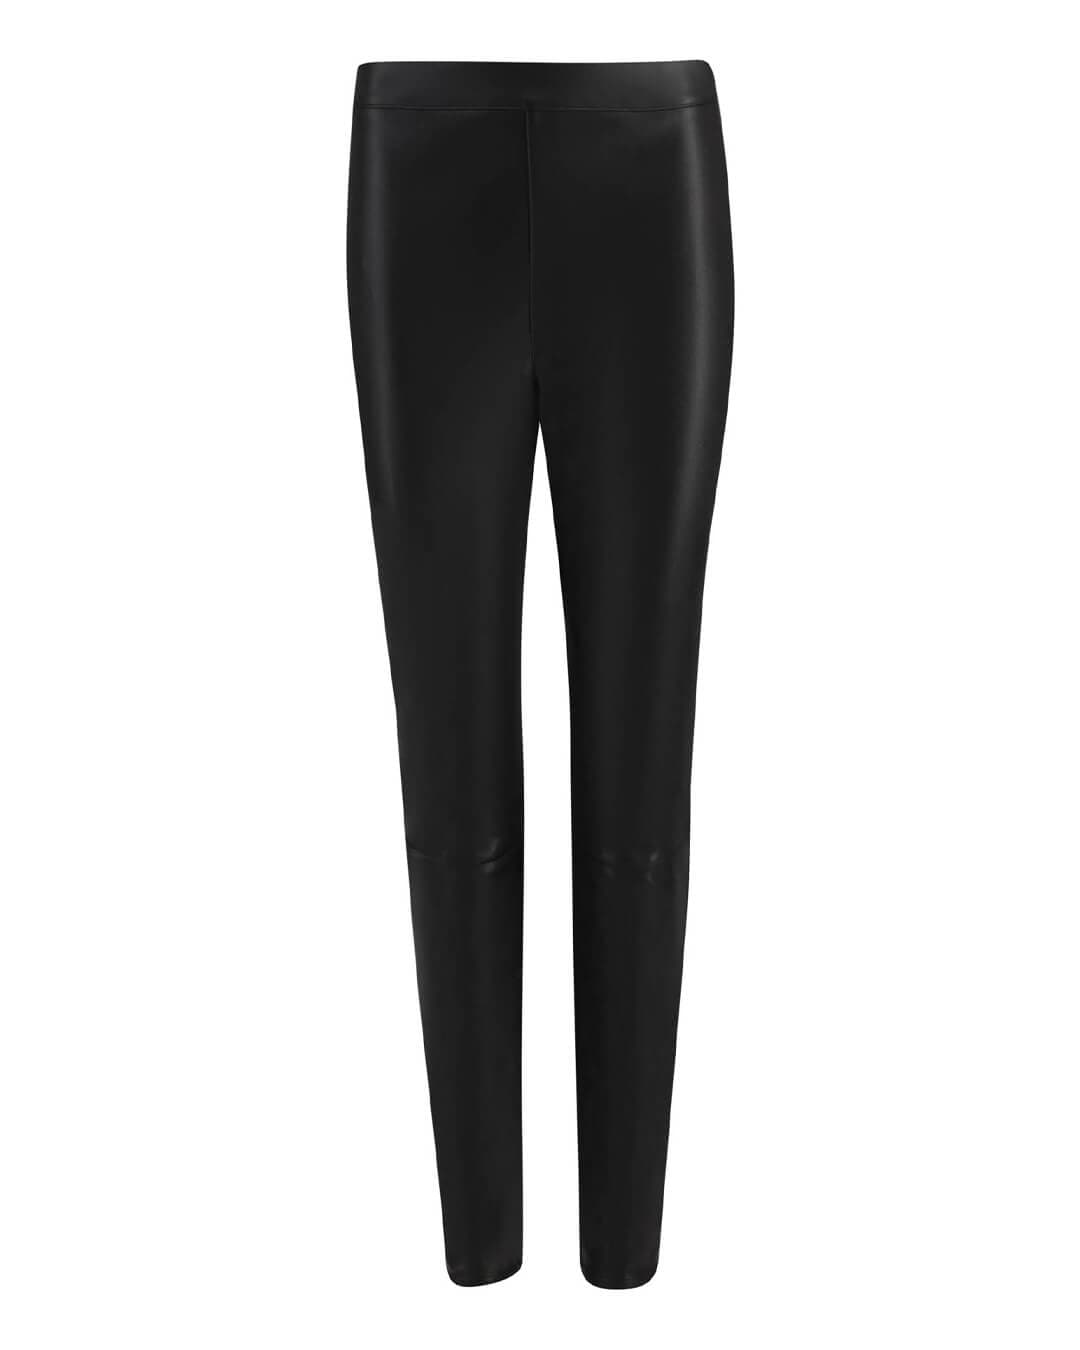 Fynch-Hatton Trousers Fynch-Hatton Black Leather Optic Trousers